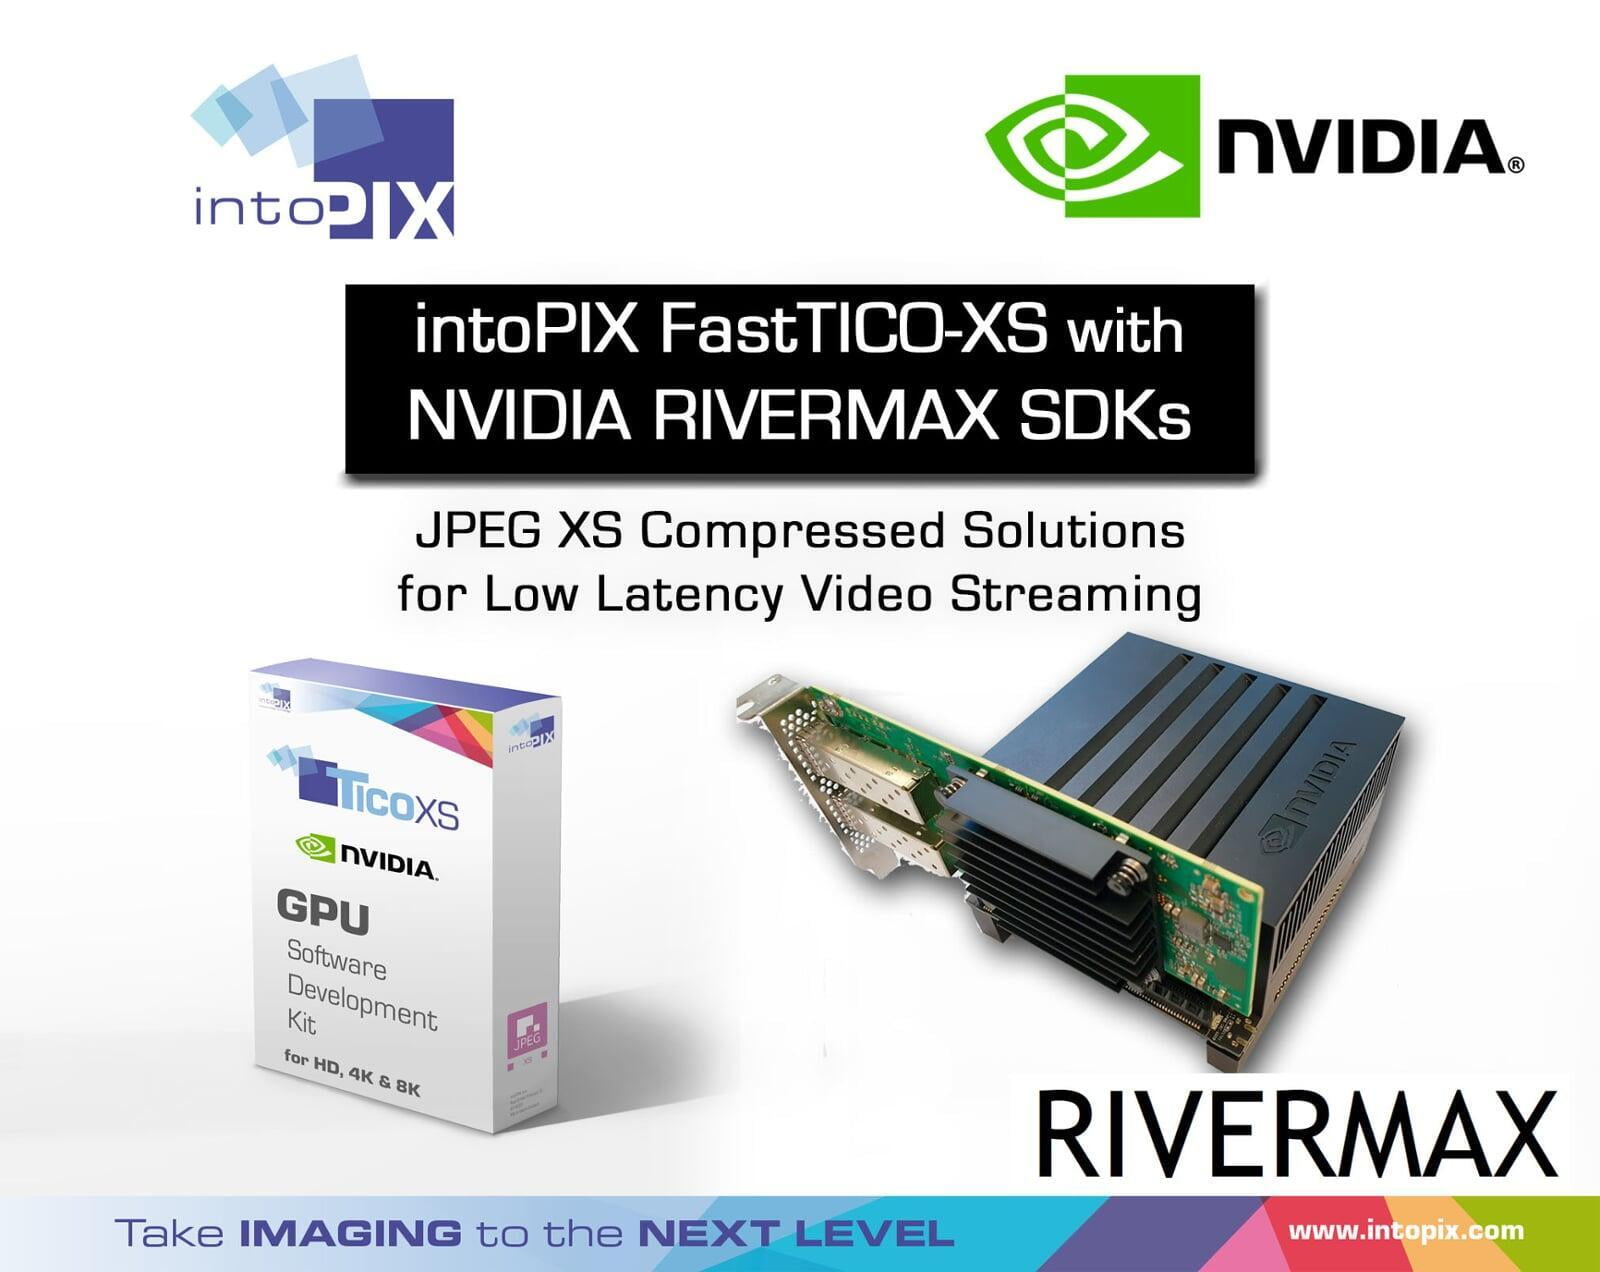 intoPIX delivers JPEG XS Compressed Solutions for Low Latency Video Streaming with NVIDIA GPUs